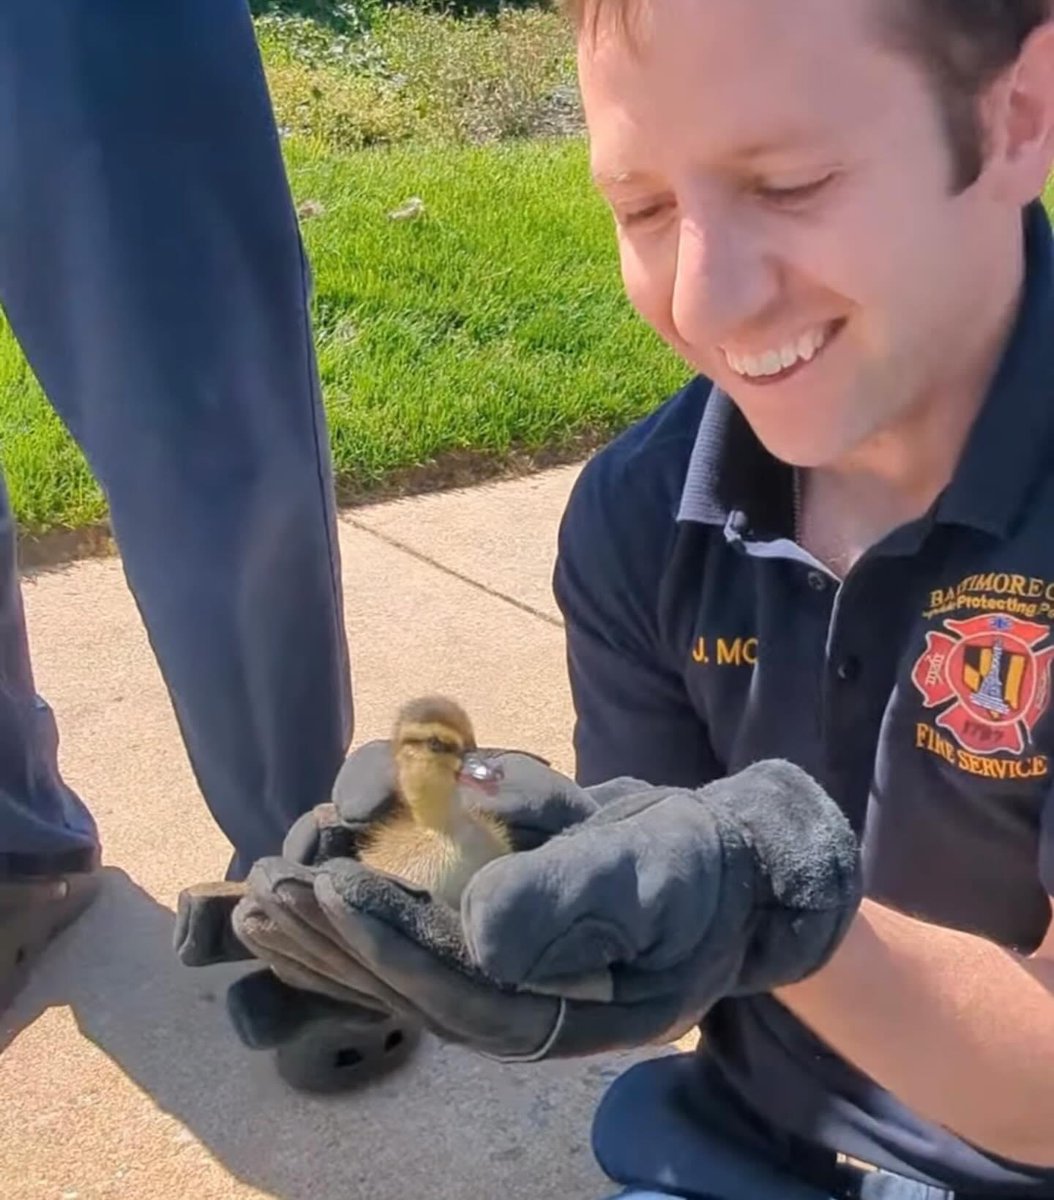 Members from @BaltimoreFire Truck 23, Pigtown, were awaiting personnel to exit St Agnes Hospital when they noticed a momma duck staring at a storm drain. Oh no! Her babies were in there. The Firefighters flew into action and in short time, the 13 ducklings were reunited with mom.